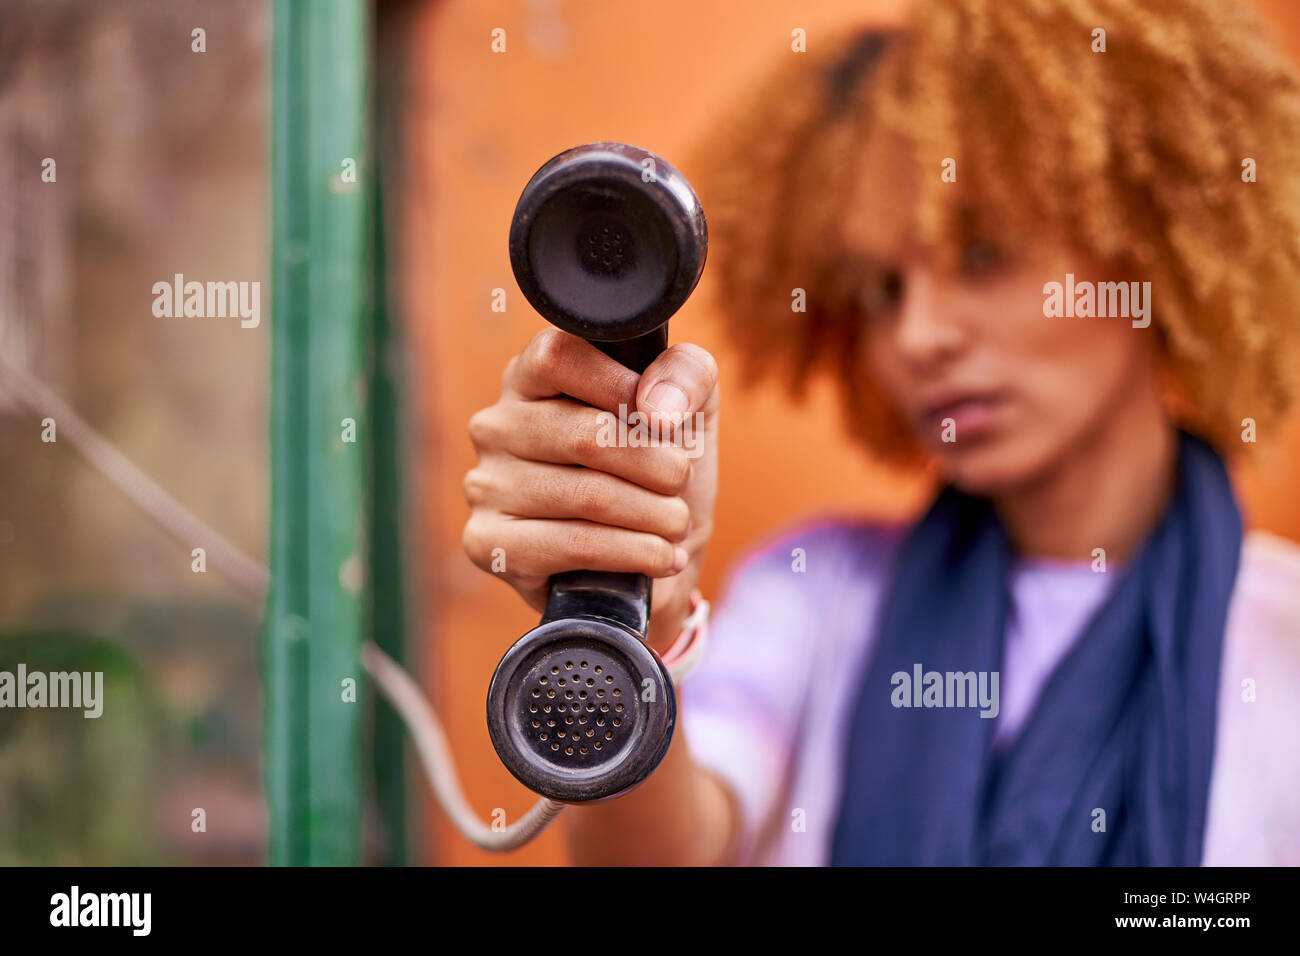 Woman holding old-fashioned telephone receiver Stock Photo